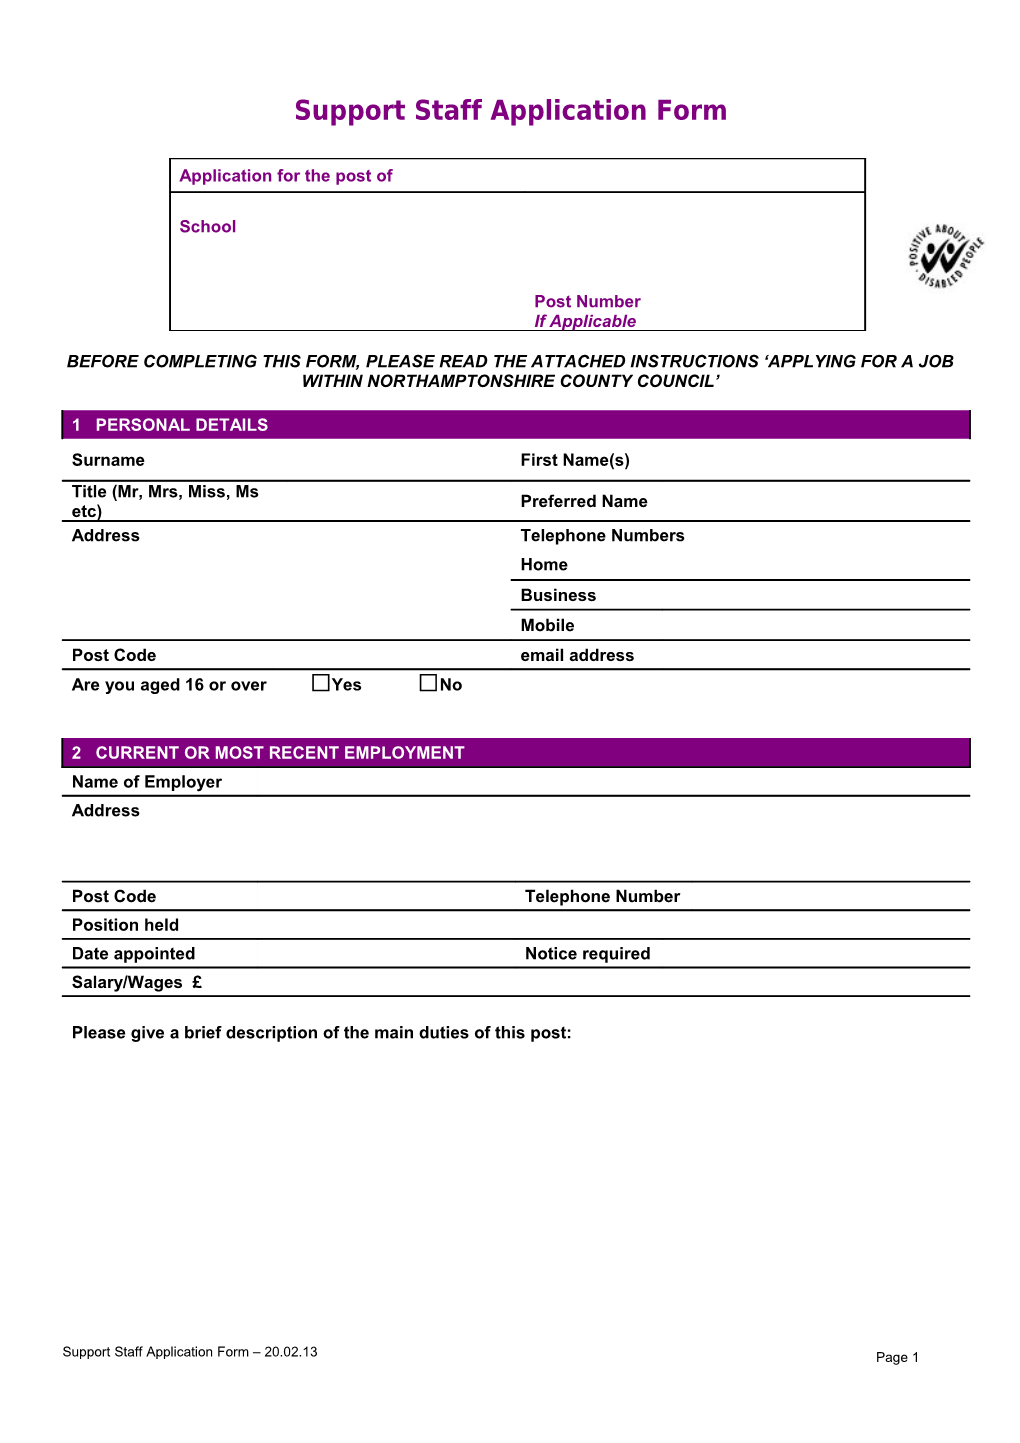 Support Staff Application Form s1